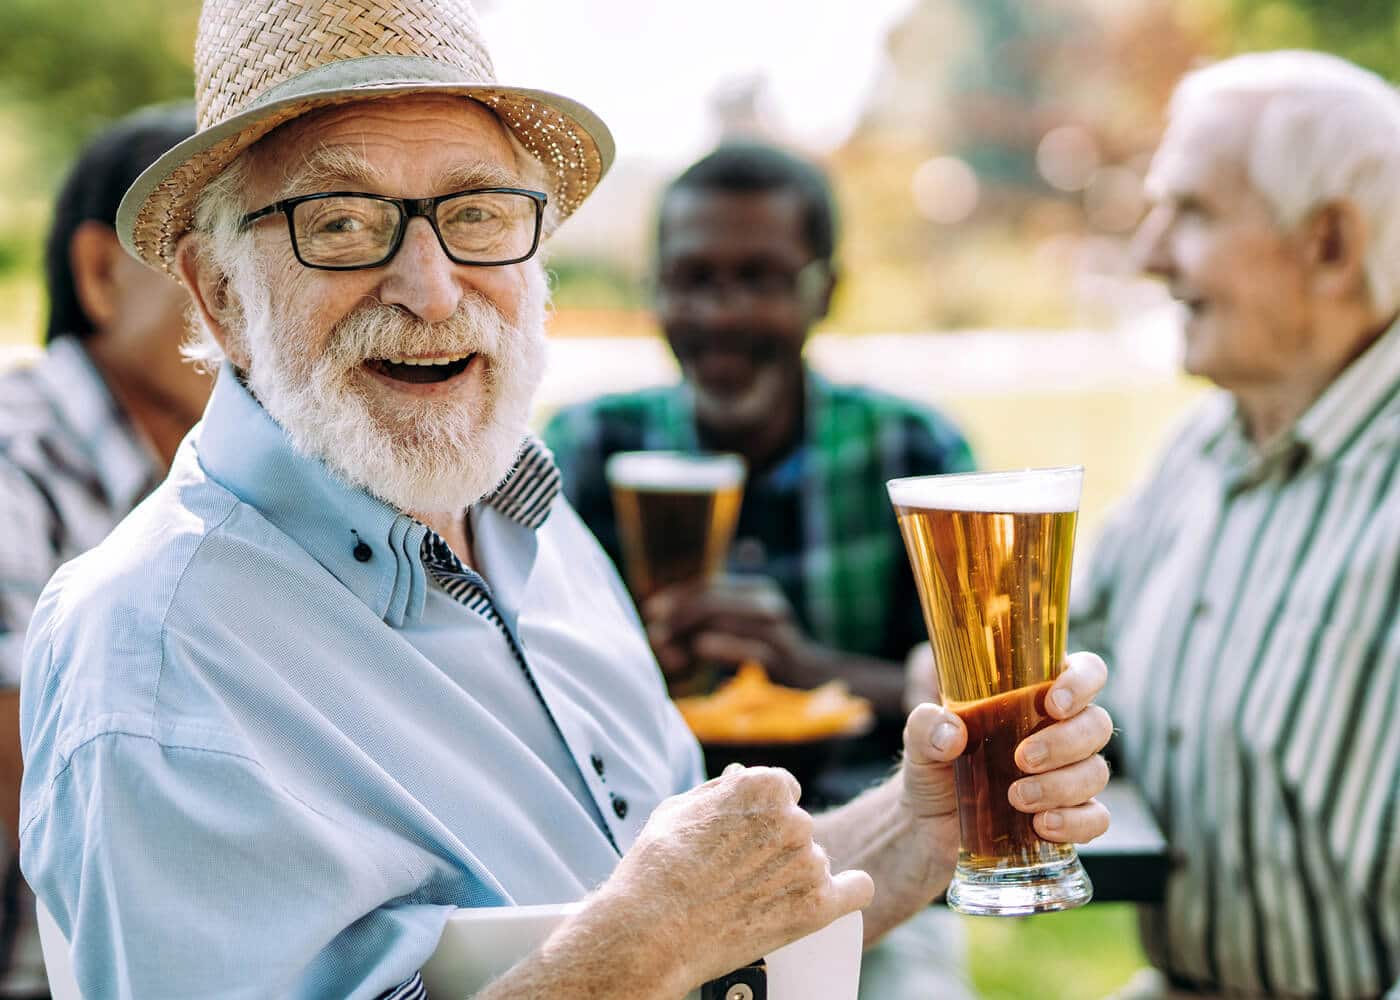 four older gentlemen laughing and talking over a beer